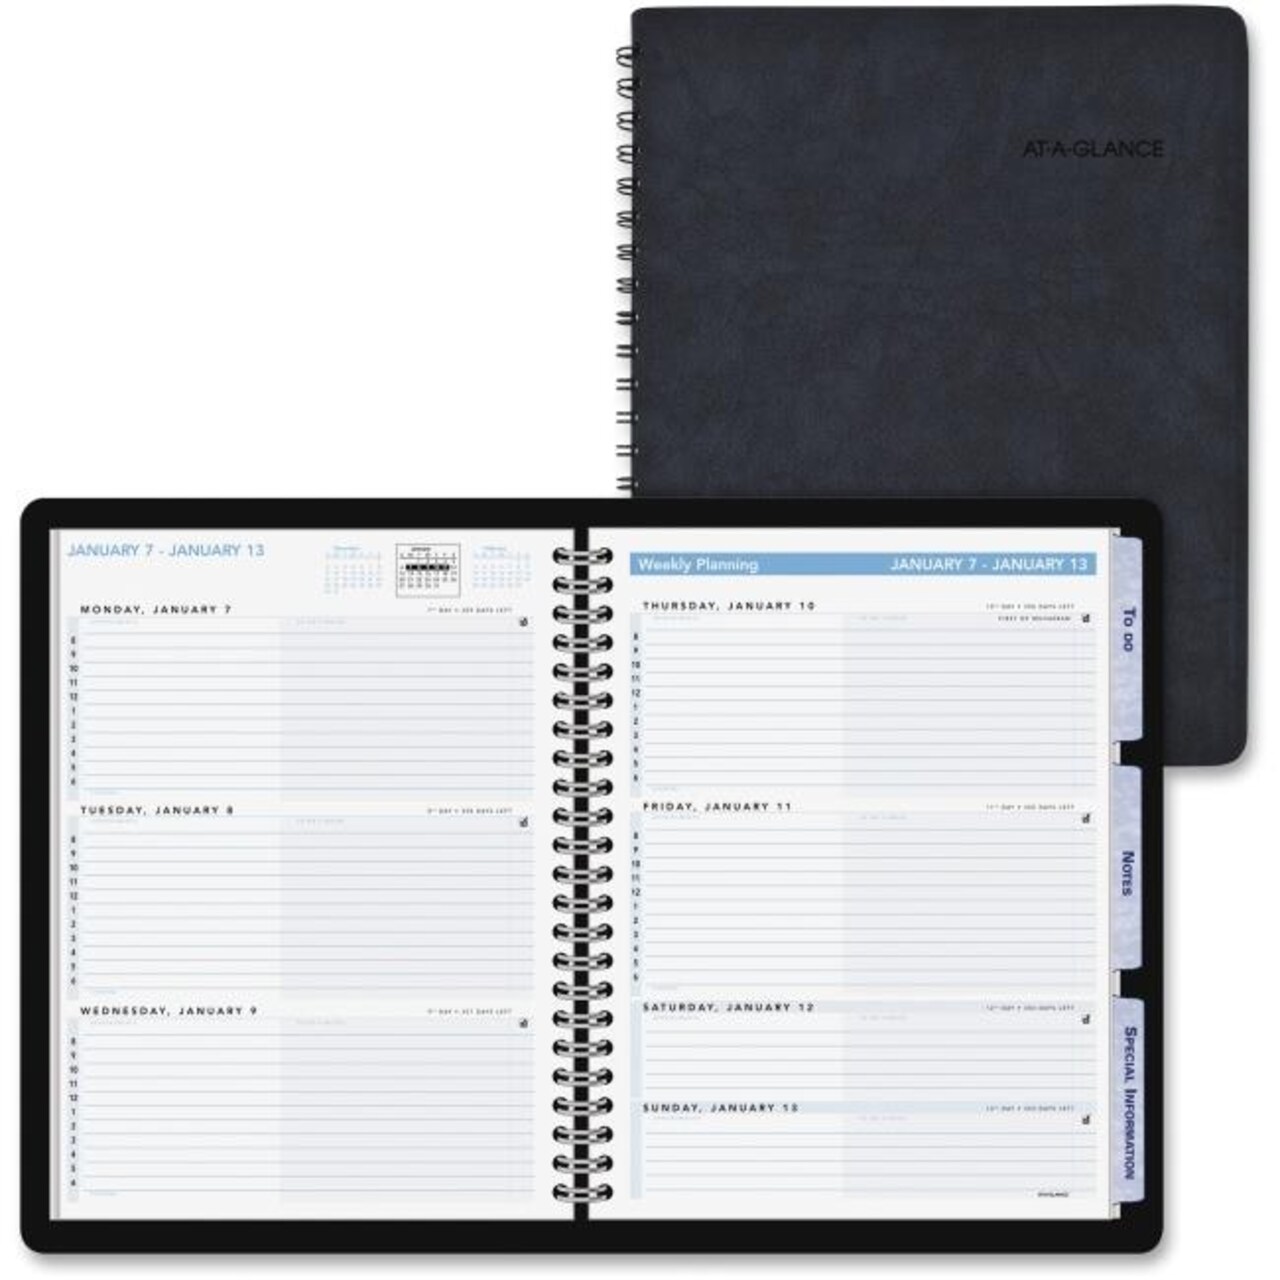 At A Glance AAG70EP0105 8 x 11 in. Action Planner Weekly Appointment Book - Black